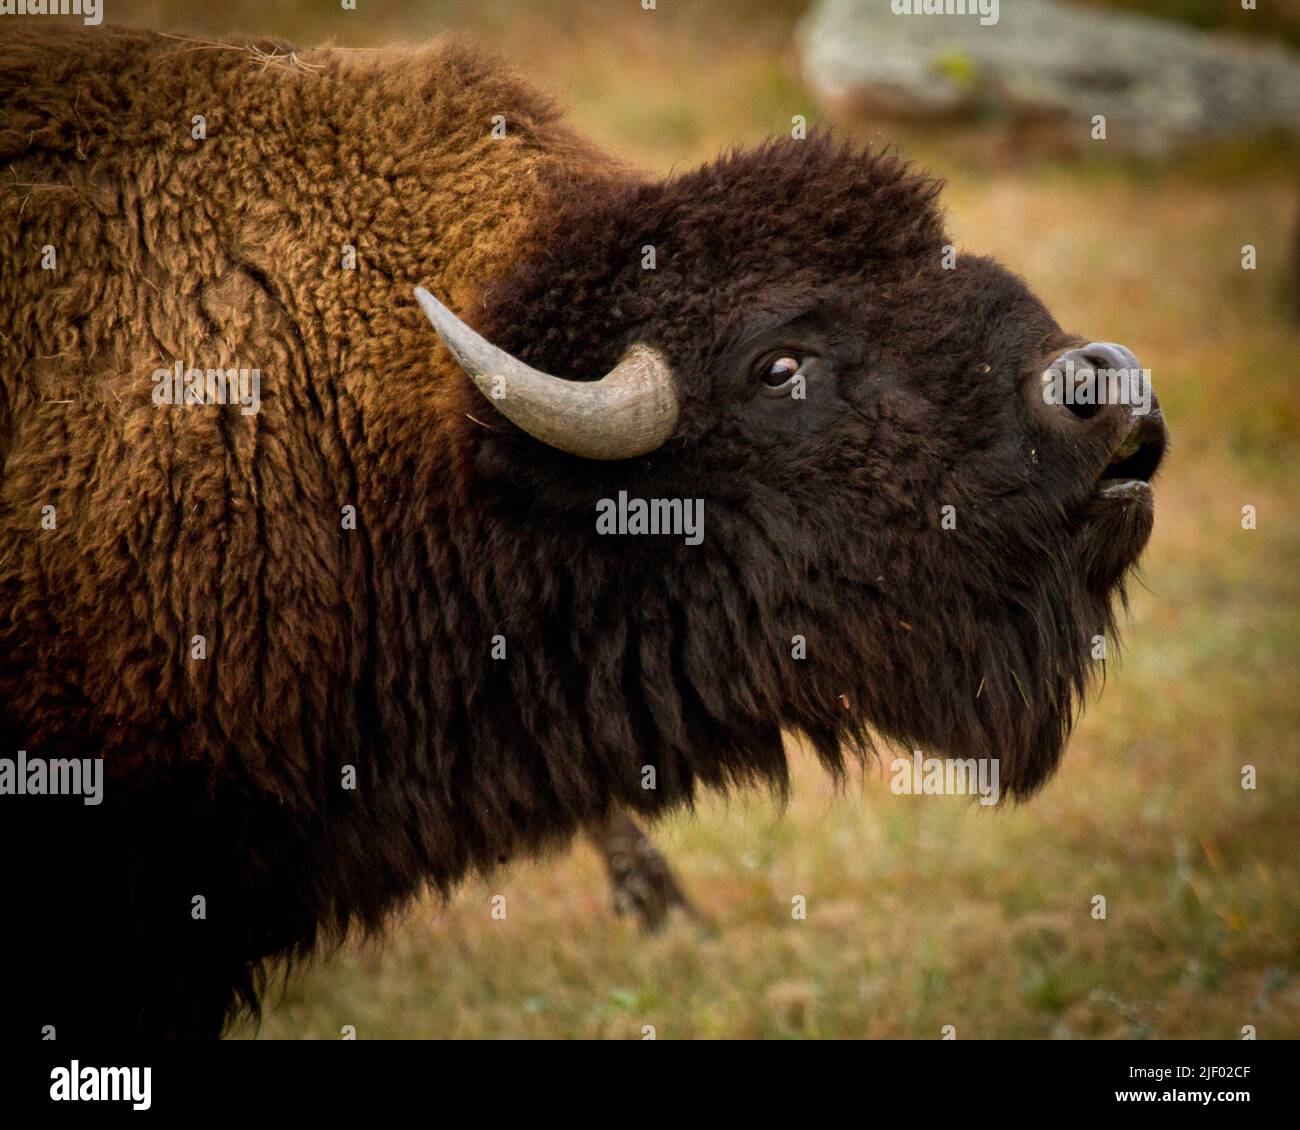 Bull Bison in Rut... best to keep your distance if you see them acting this way Stock Photo